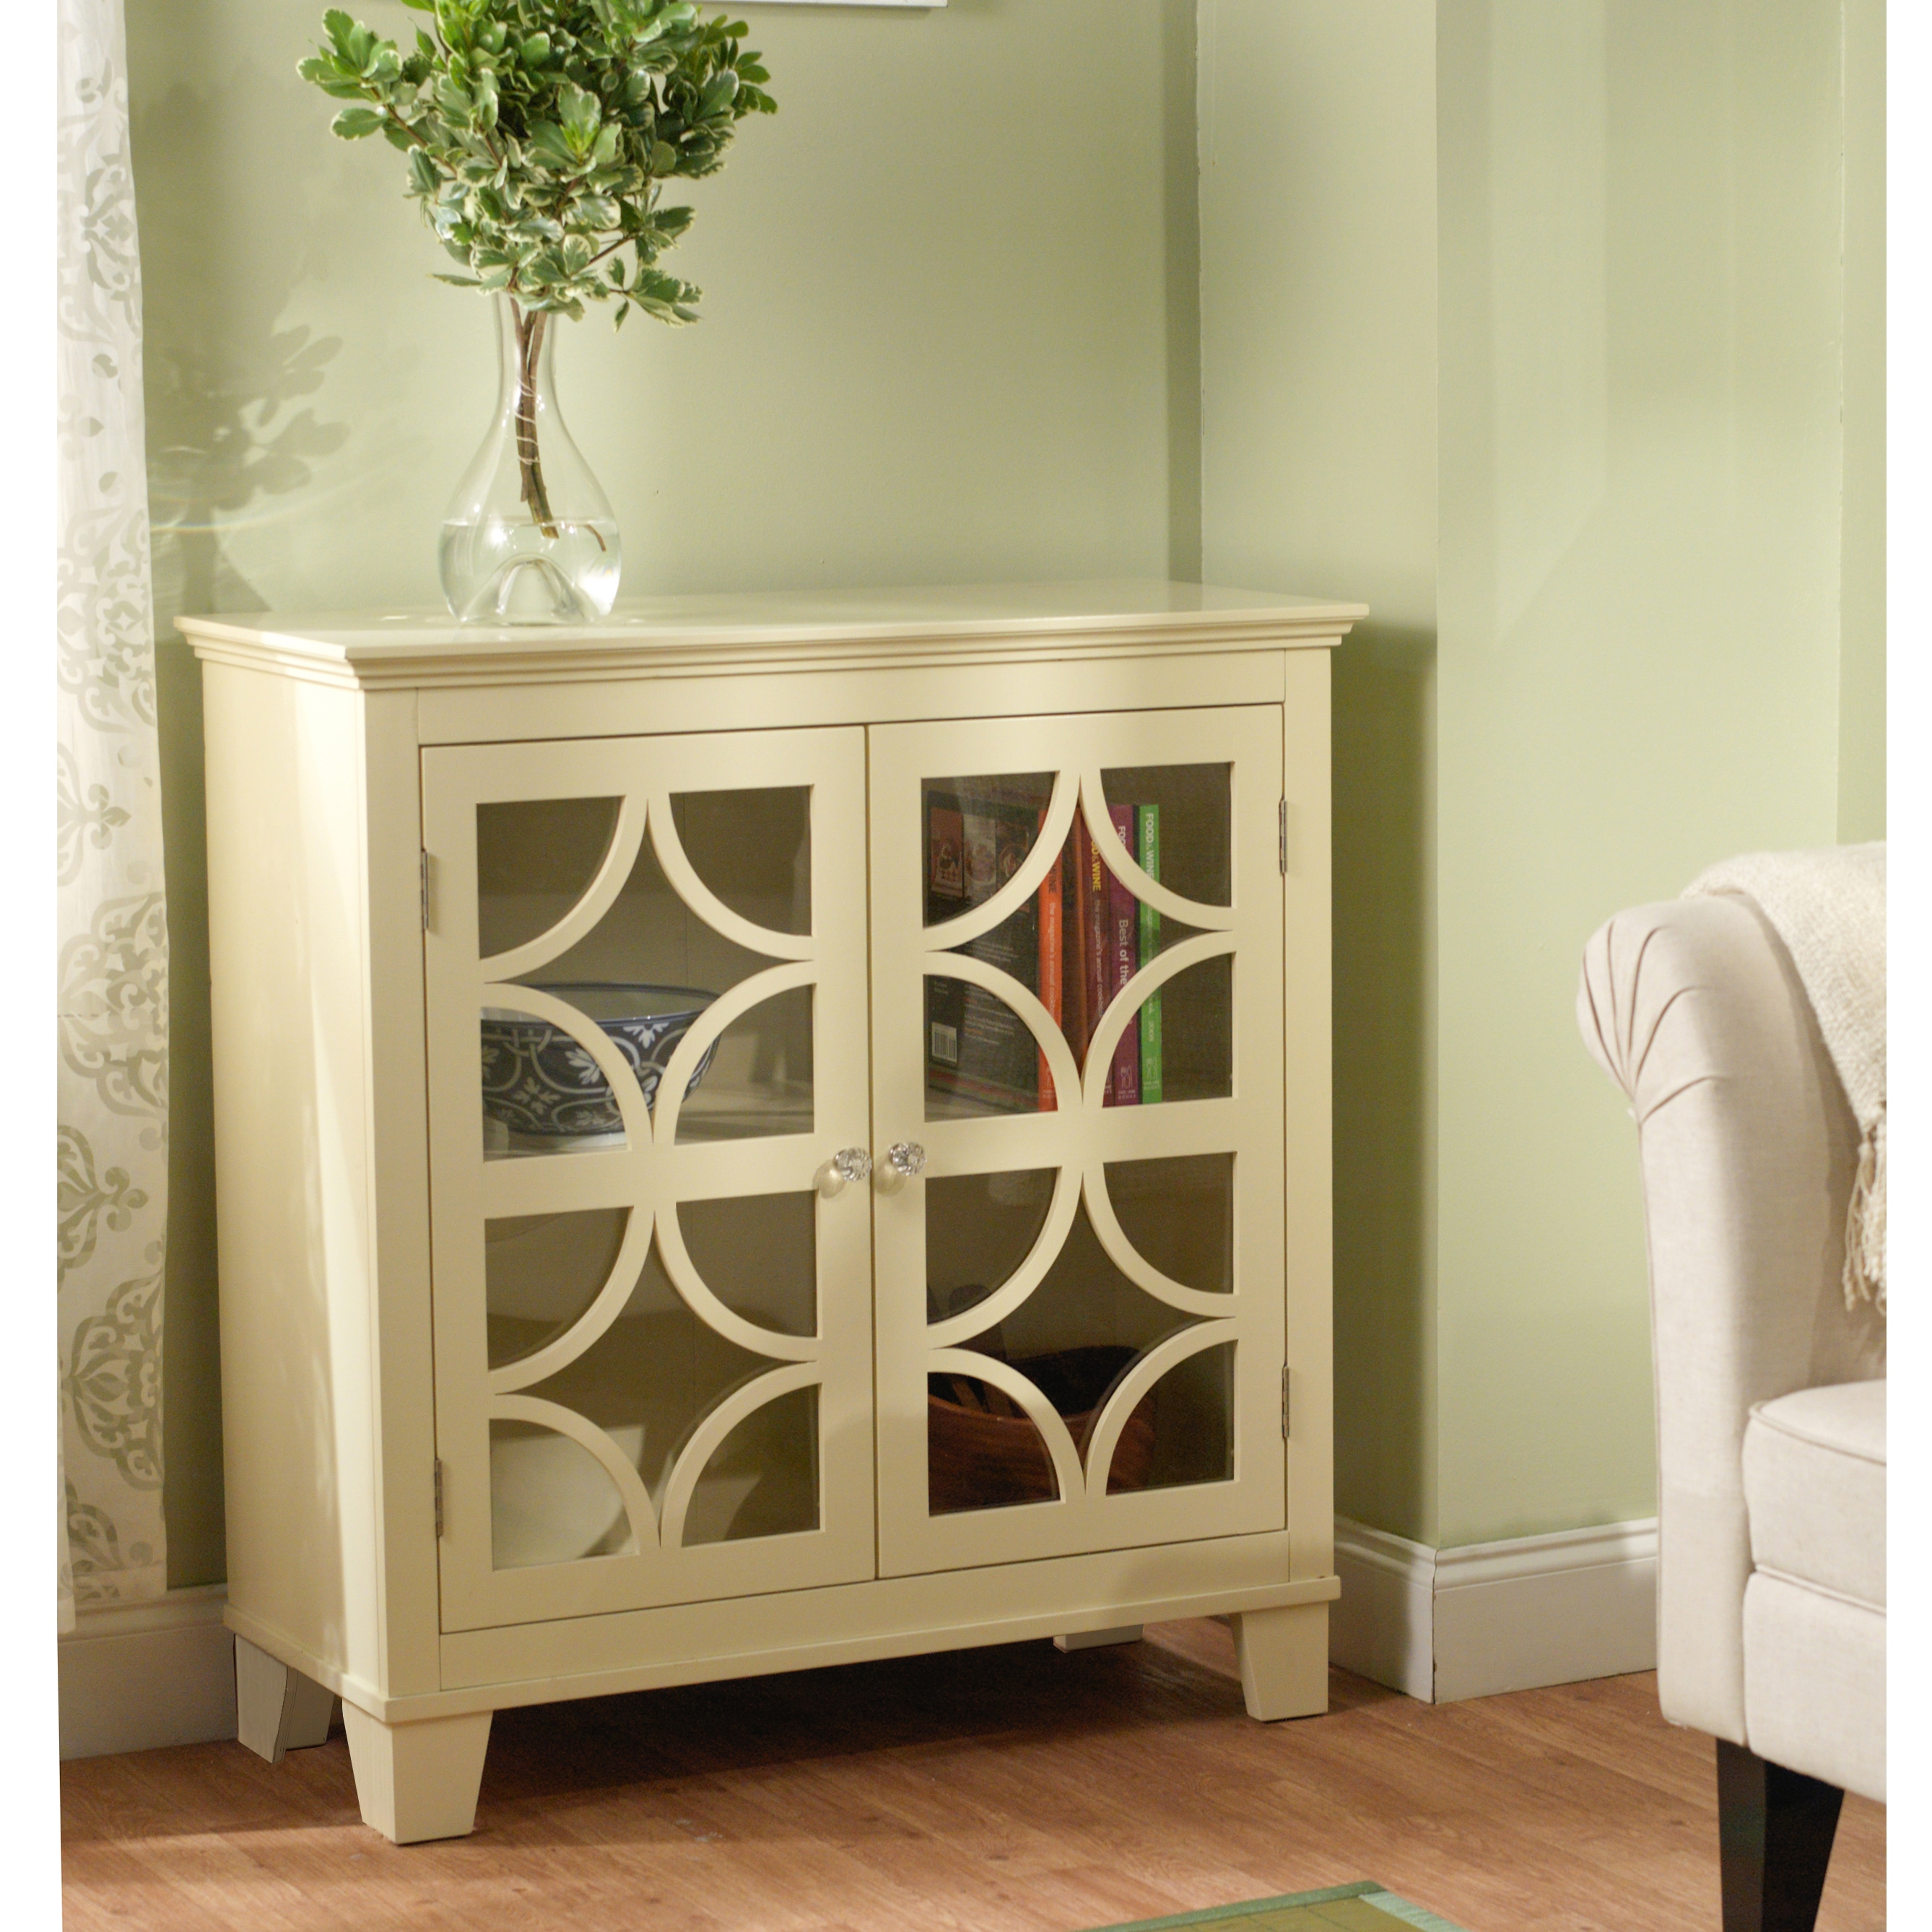 Simple Living Sydney Ivory Cabinet - 13975797 - Overstock.com Shopping - Big Discounts on Simple ...